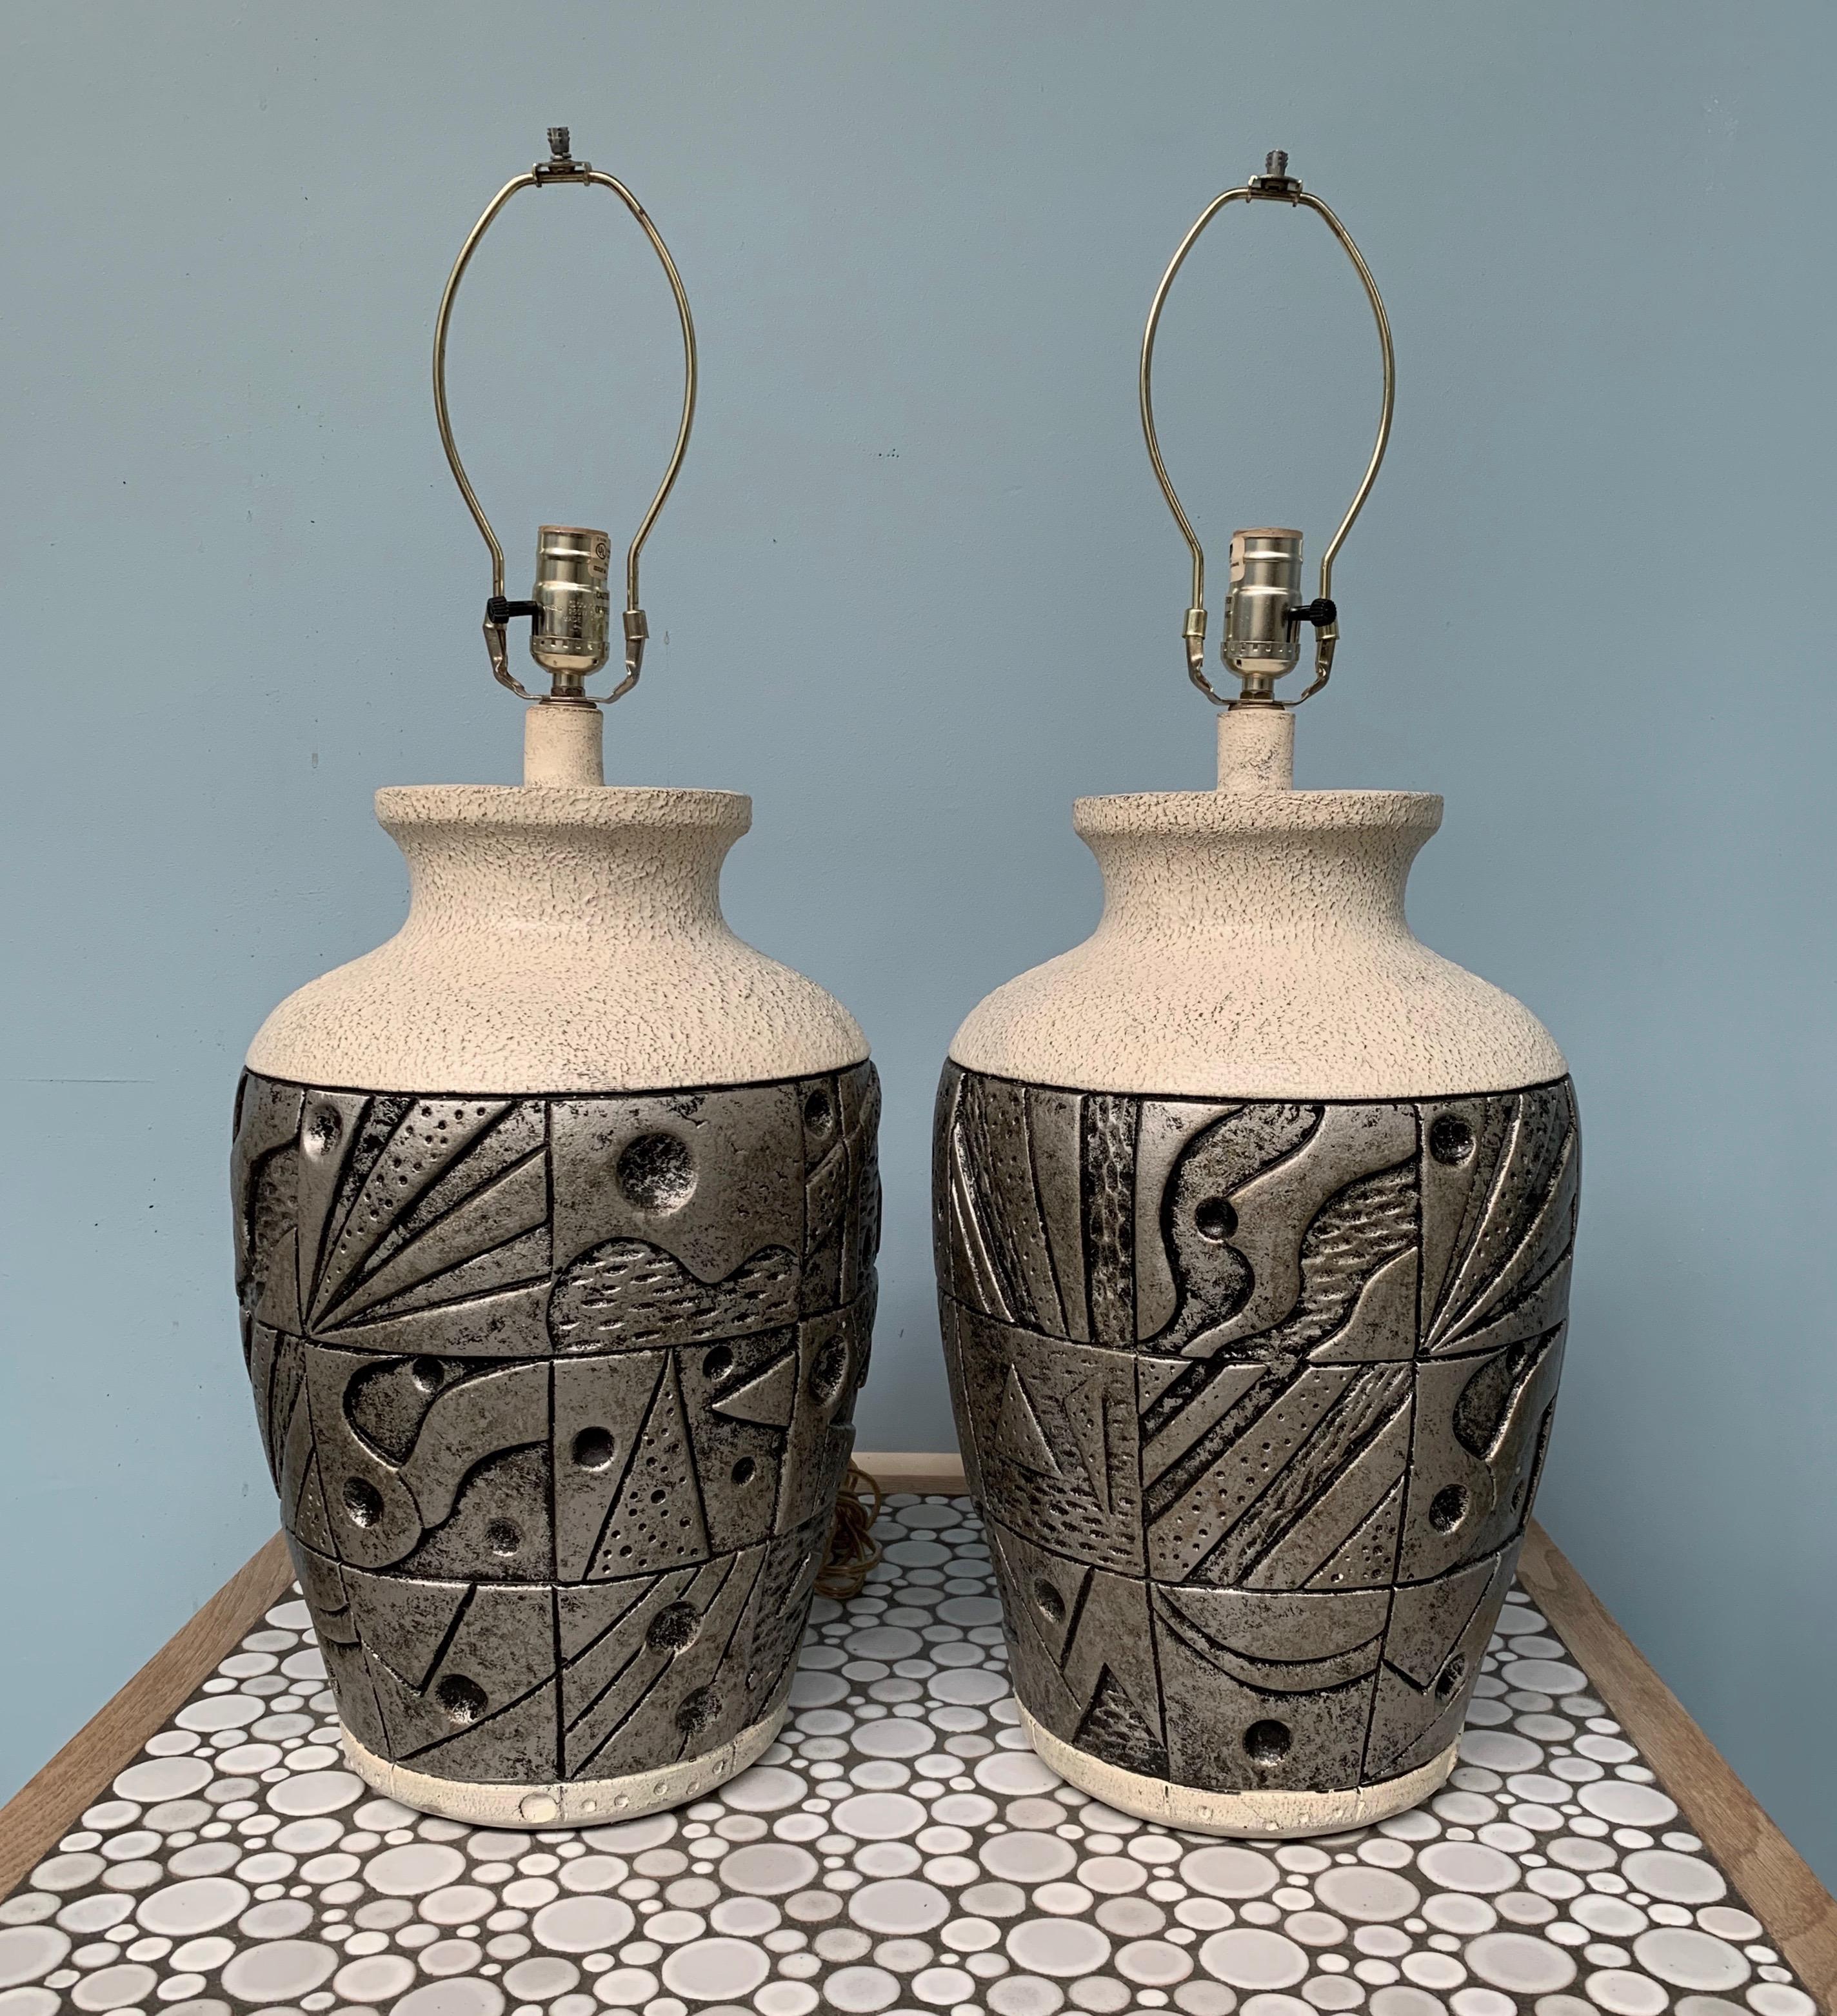 A pair of lamps by Everlasting Lamps of Sun Valley Ca. produced in chalk has a base relief sculptural decoration.